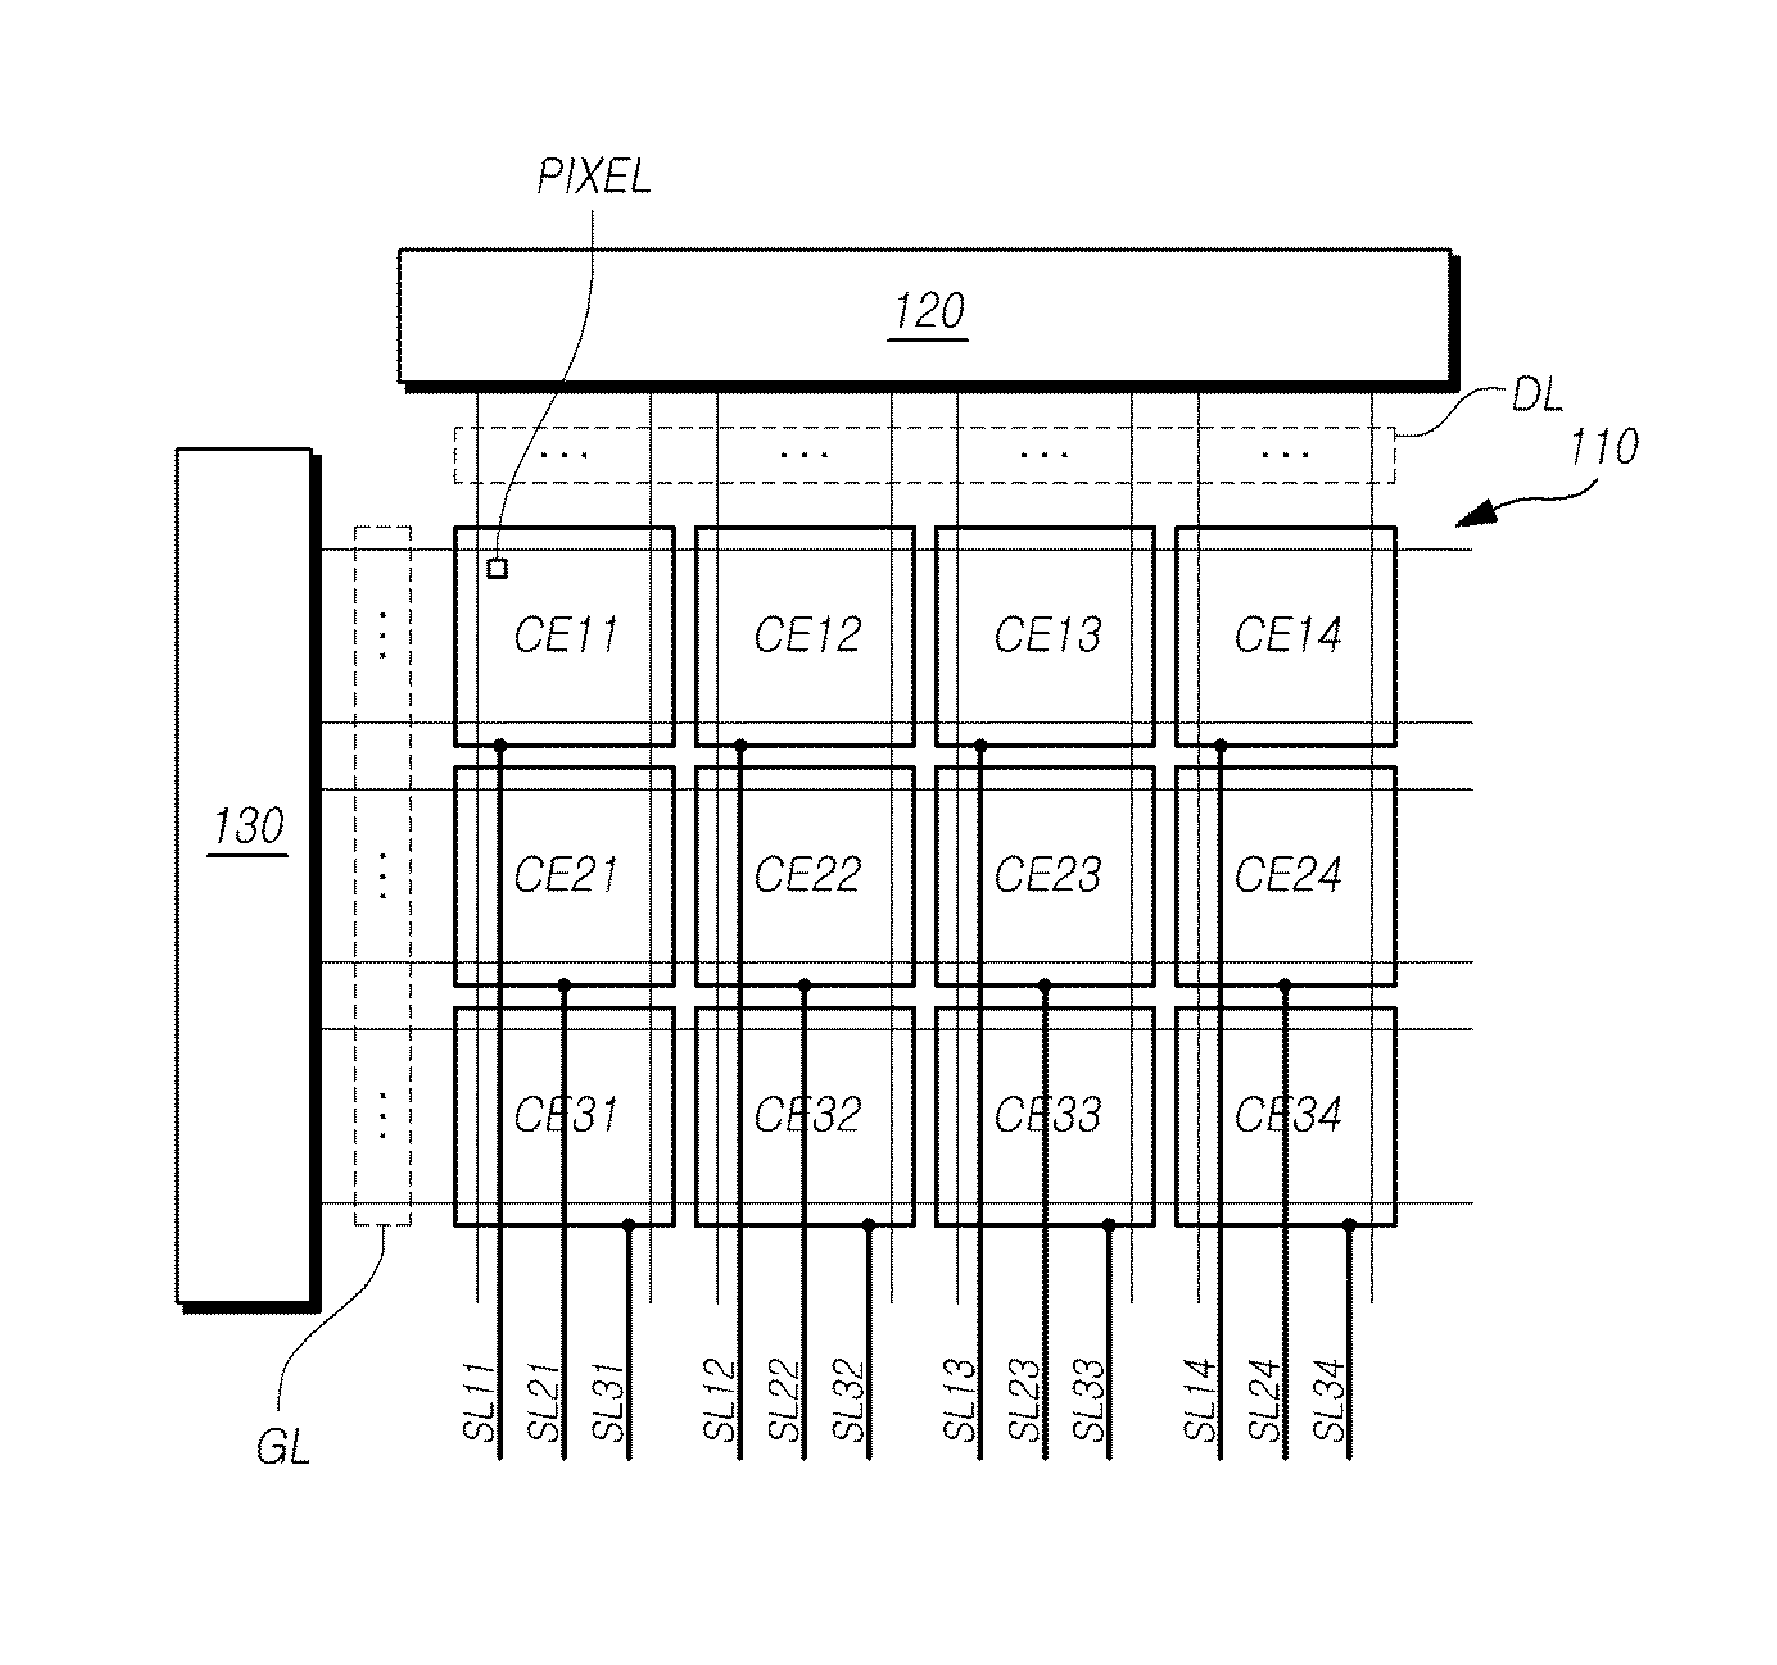 In-cell touch display device